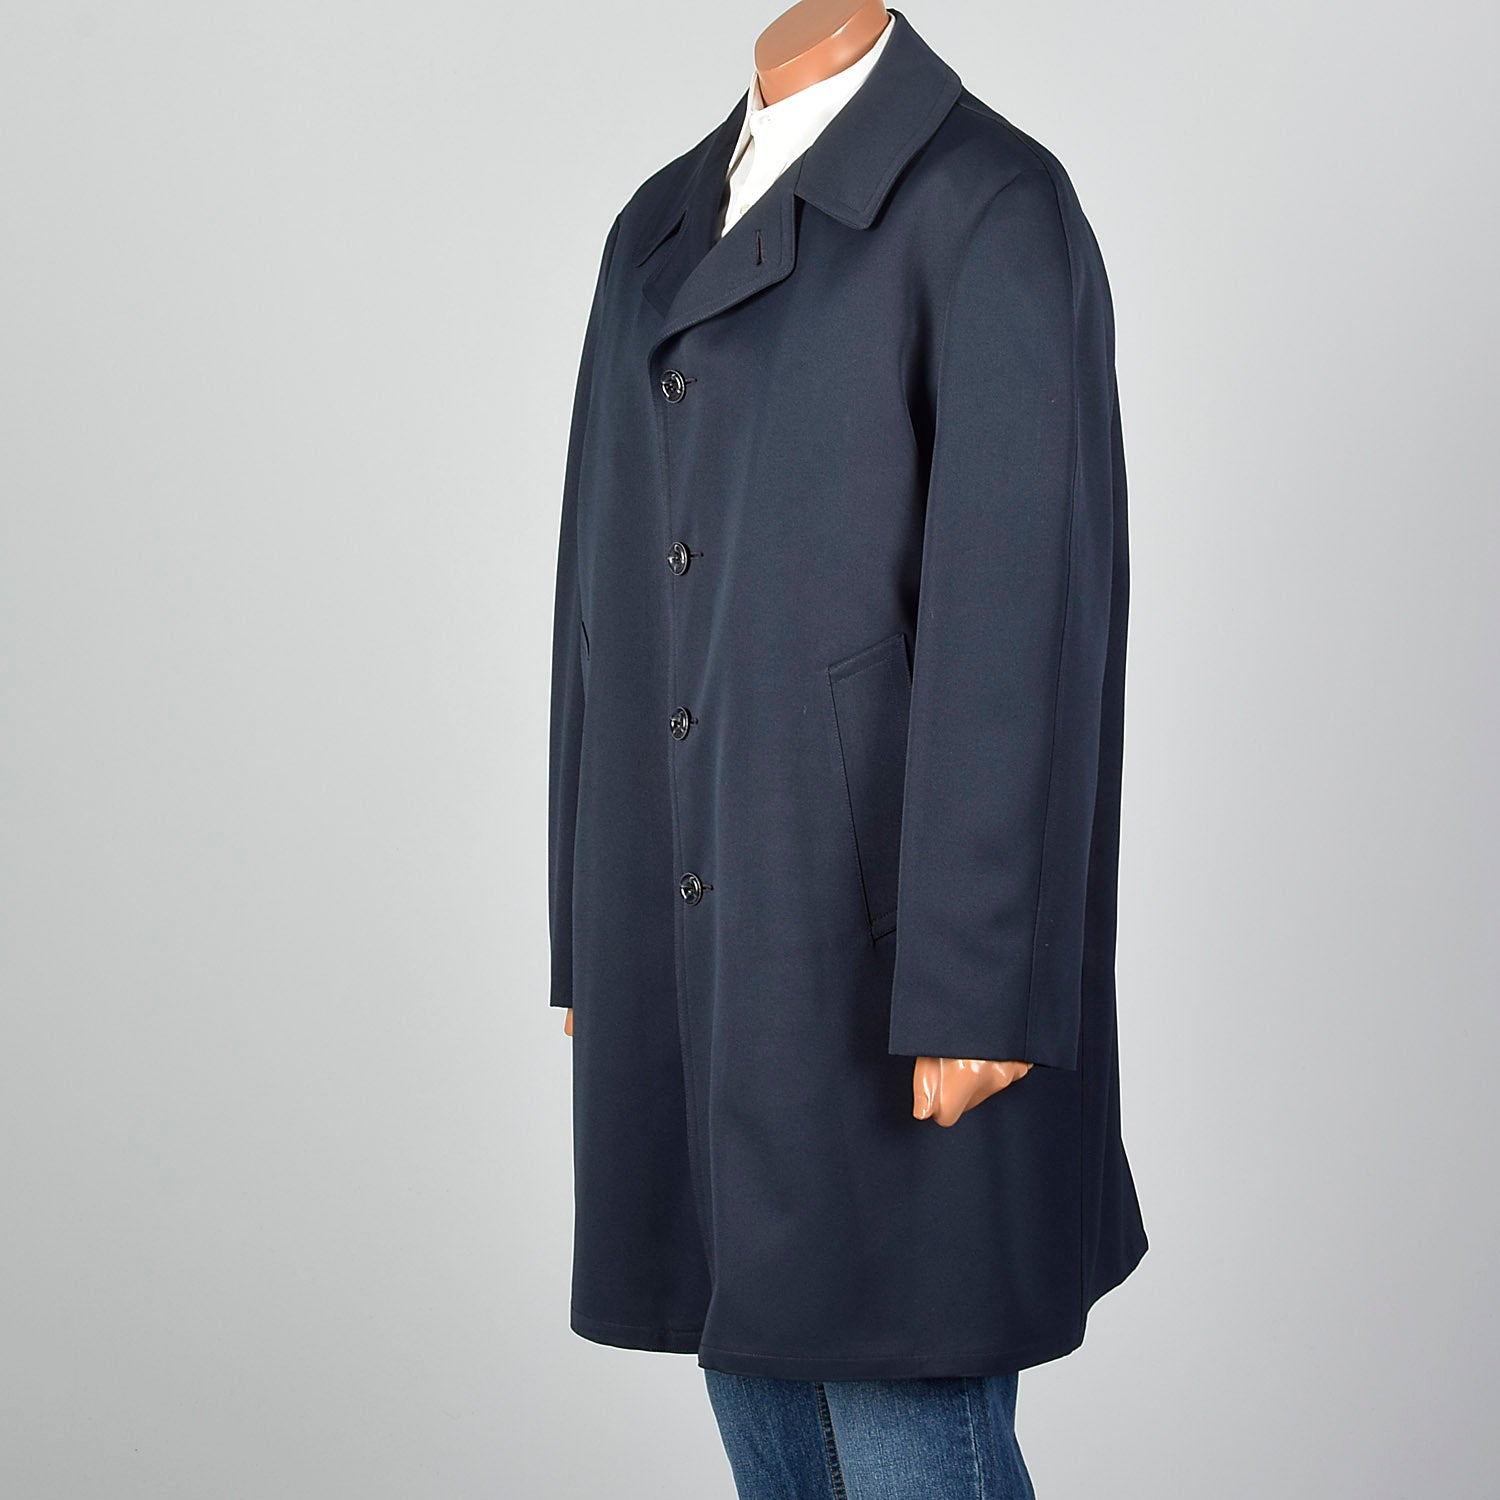 1970s Navy Overcoat with Plaid Liner